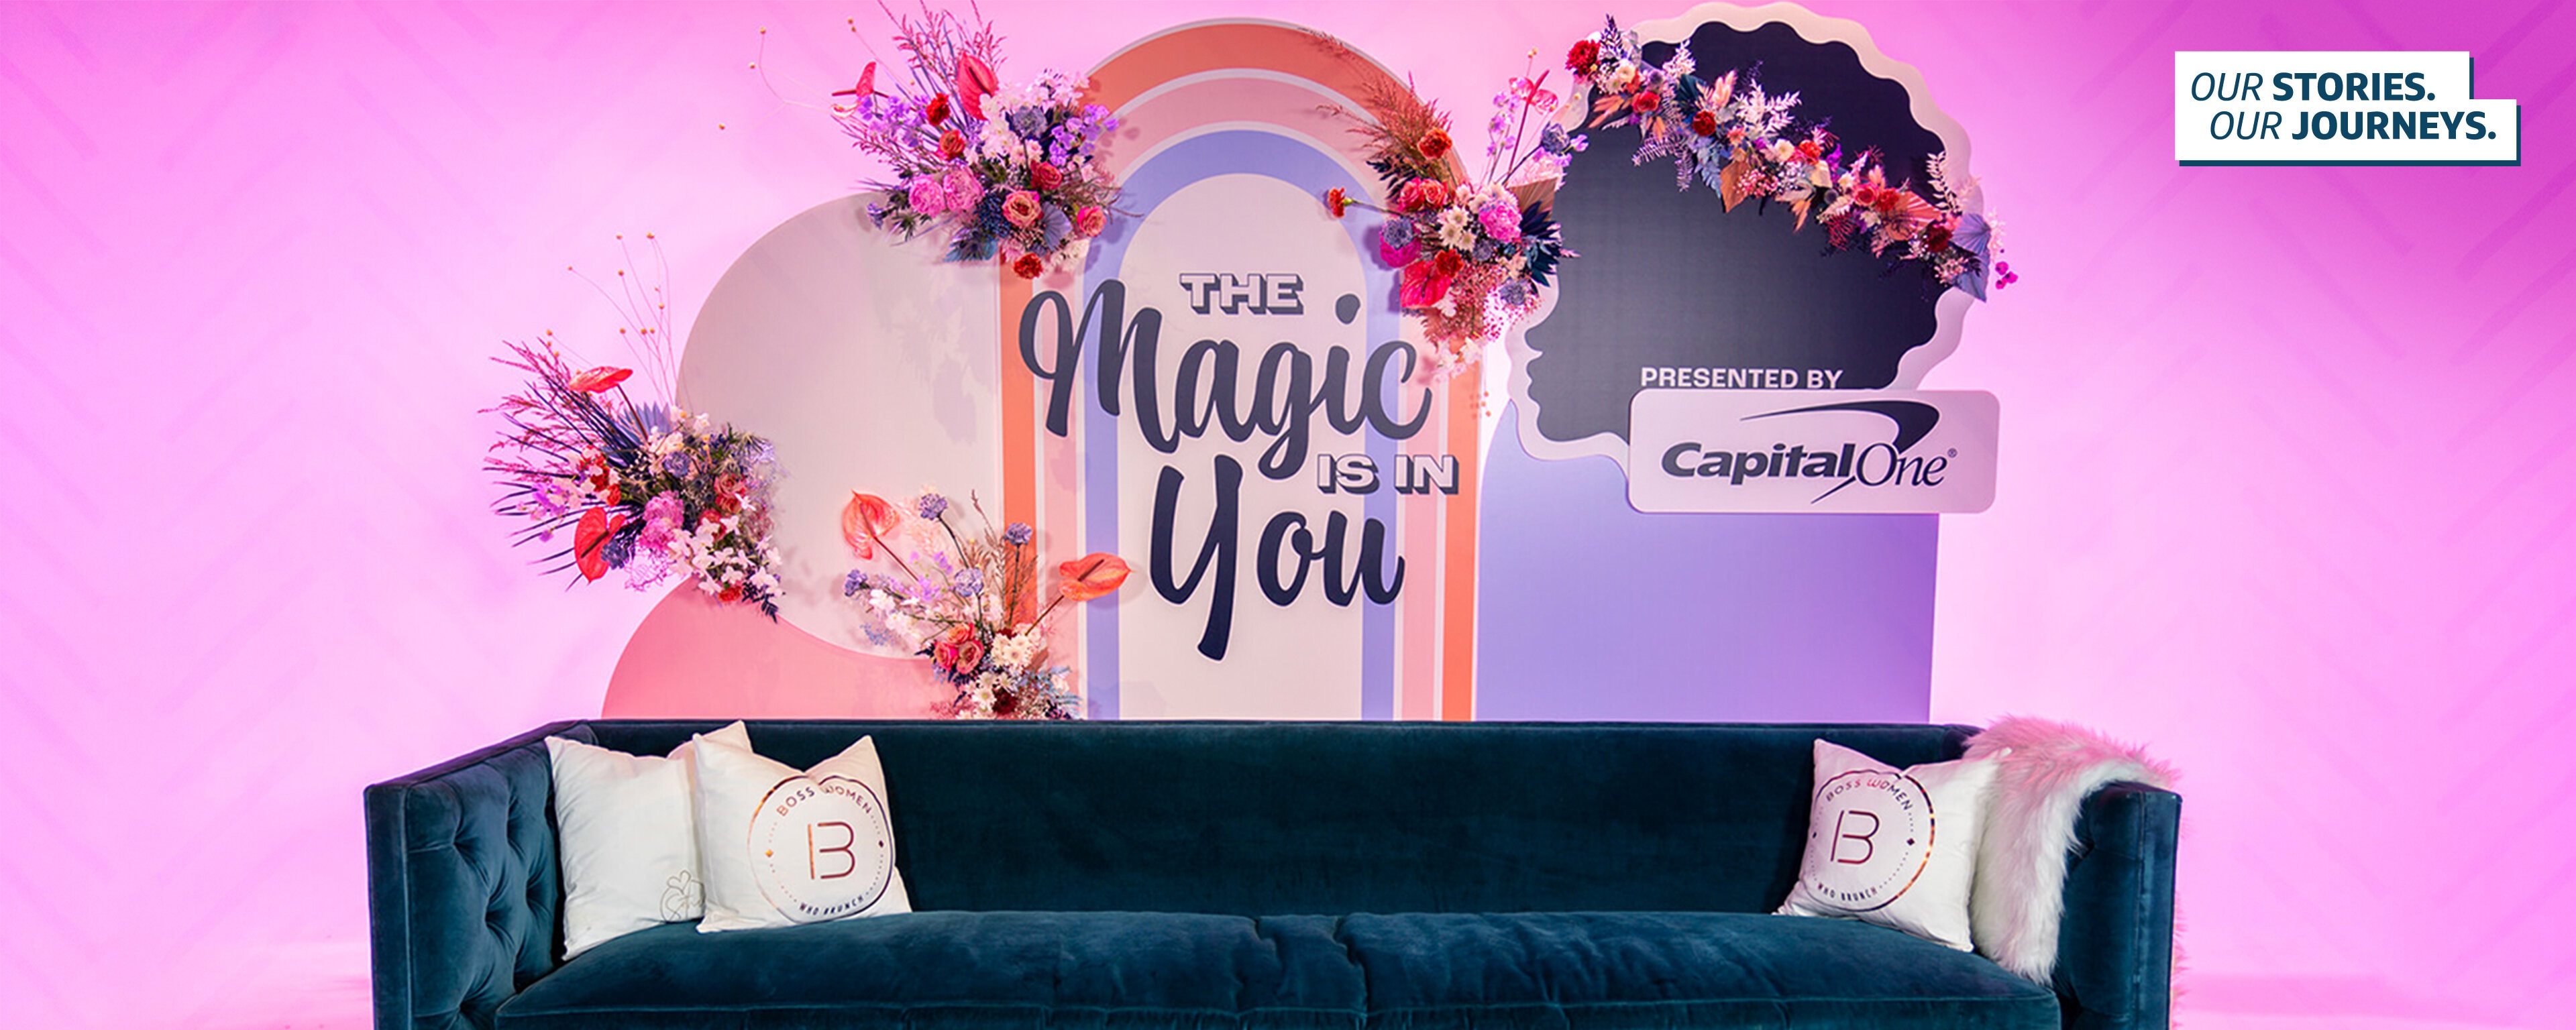 The Black Girl Magic Digital Summit Capital One set up, with a green couch in front of a pink wall and a rainbow sign with flowers that says "TheMagic in You" with a Capital One logo sign